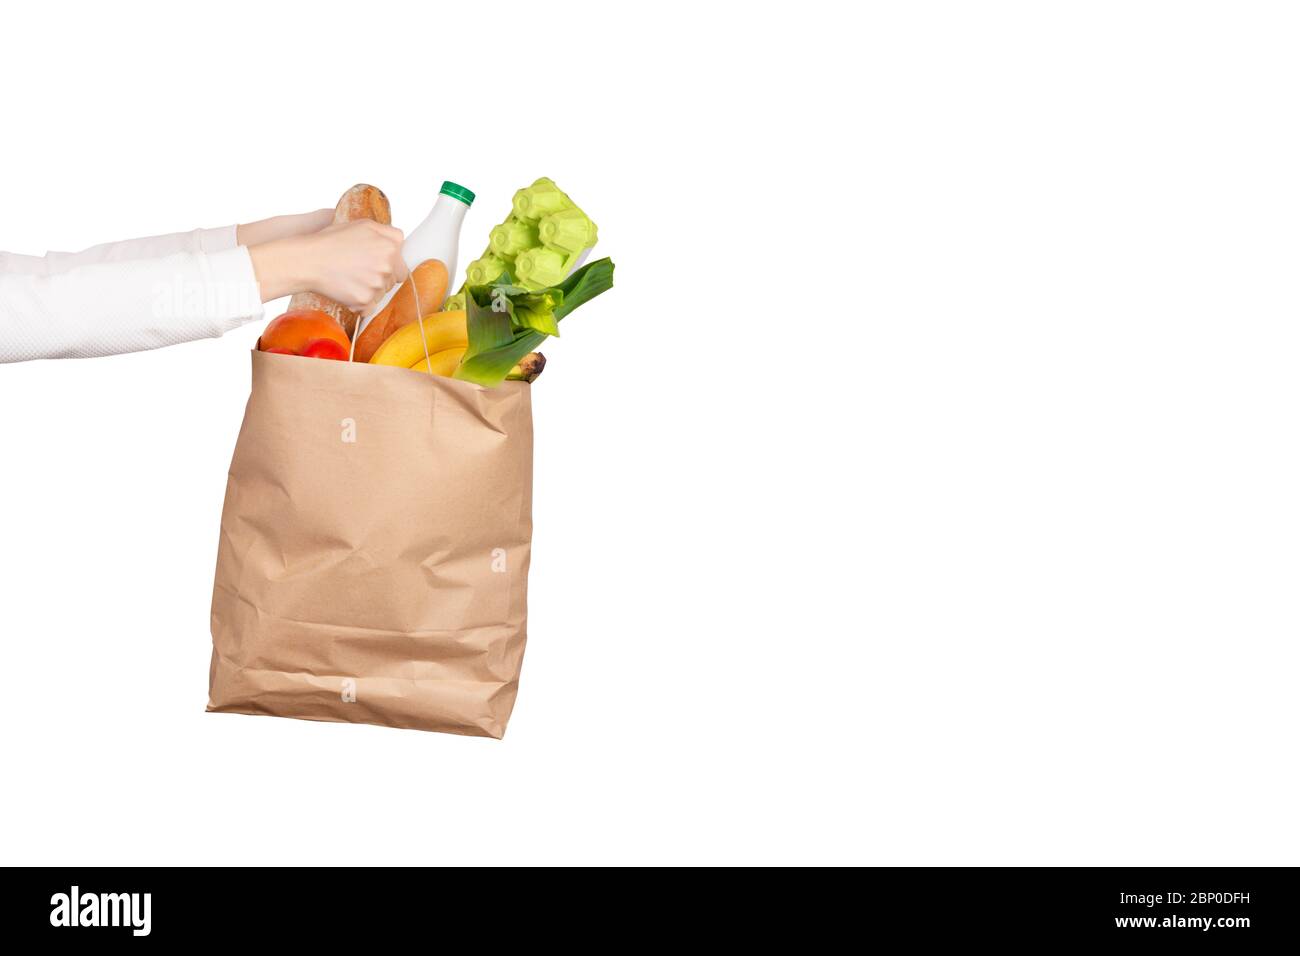 Food delivery or donation concept. Grocery store shoping. Female hands holds a paper bag filled with groceries such as fruits, vegetables, milk, yogur Stock Photo